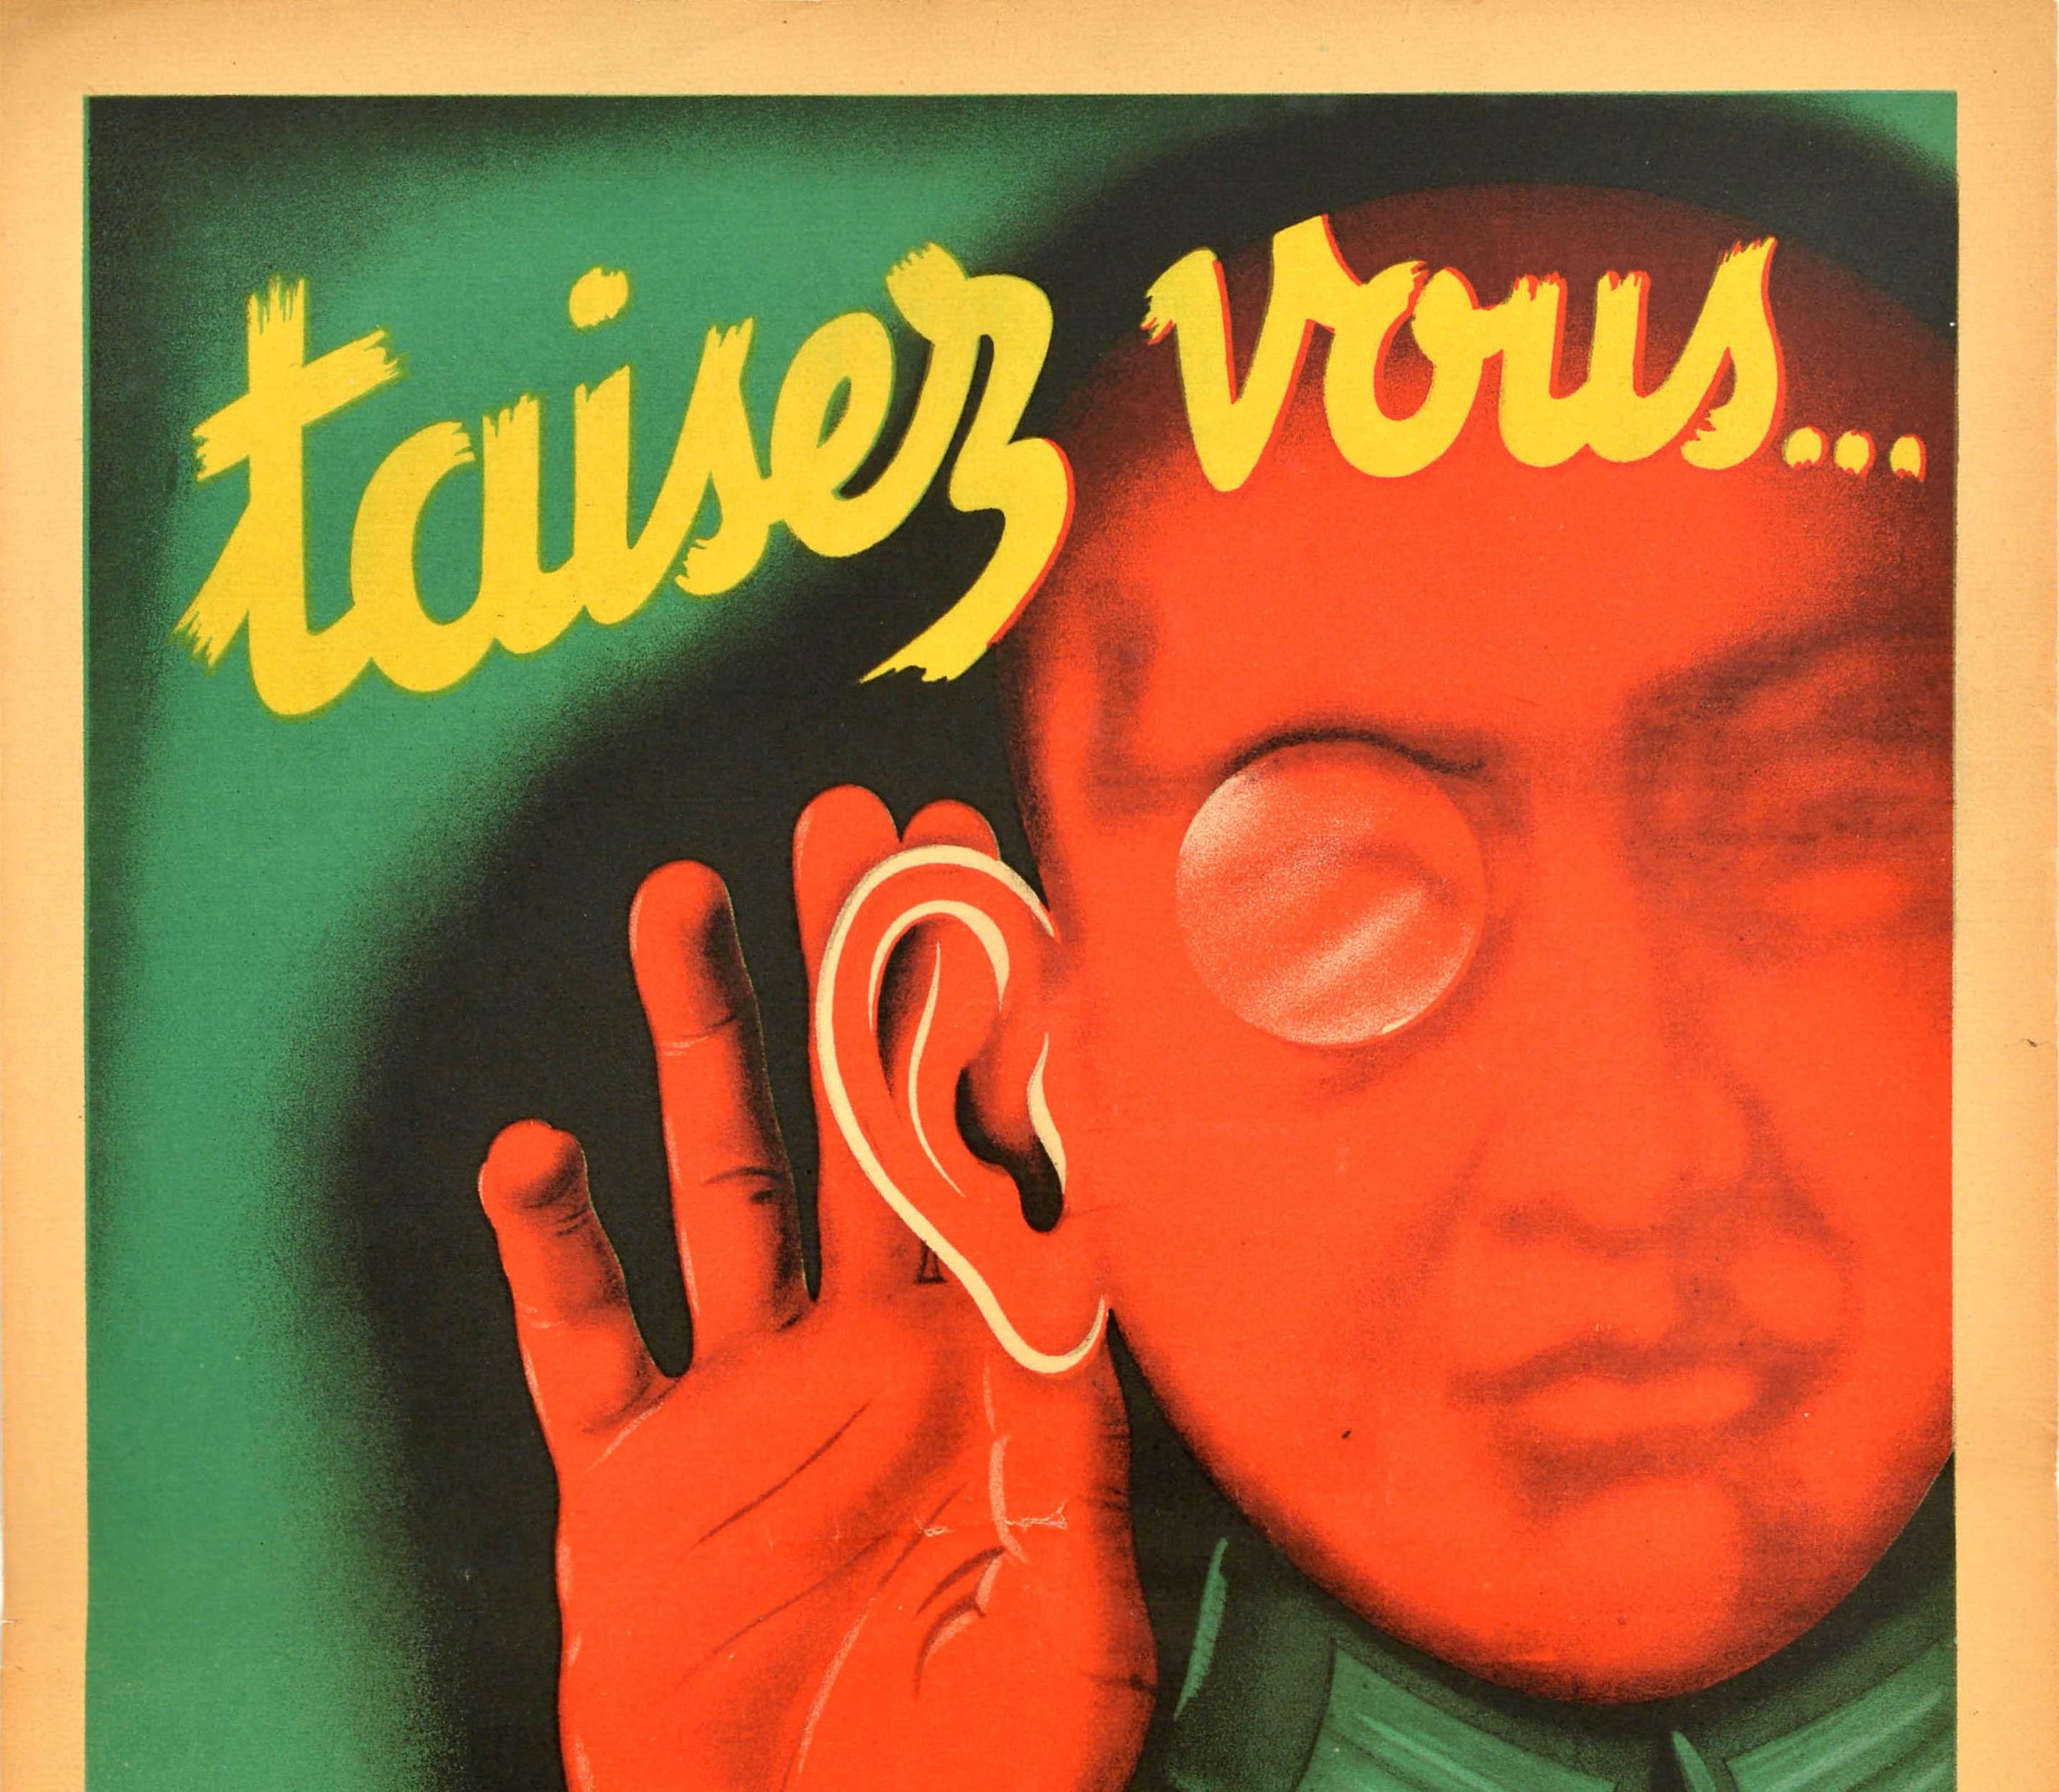 Original vintage post-occupation World War Two French propaganda poster - Taisez Vous ... l'Allemand a fui, L'Espion Rester! / Be quiet ... The Germans may have left, but their spies remain! Colourful image featuring a German spy with his face